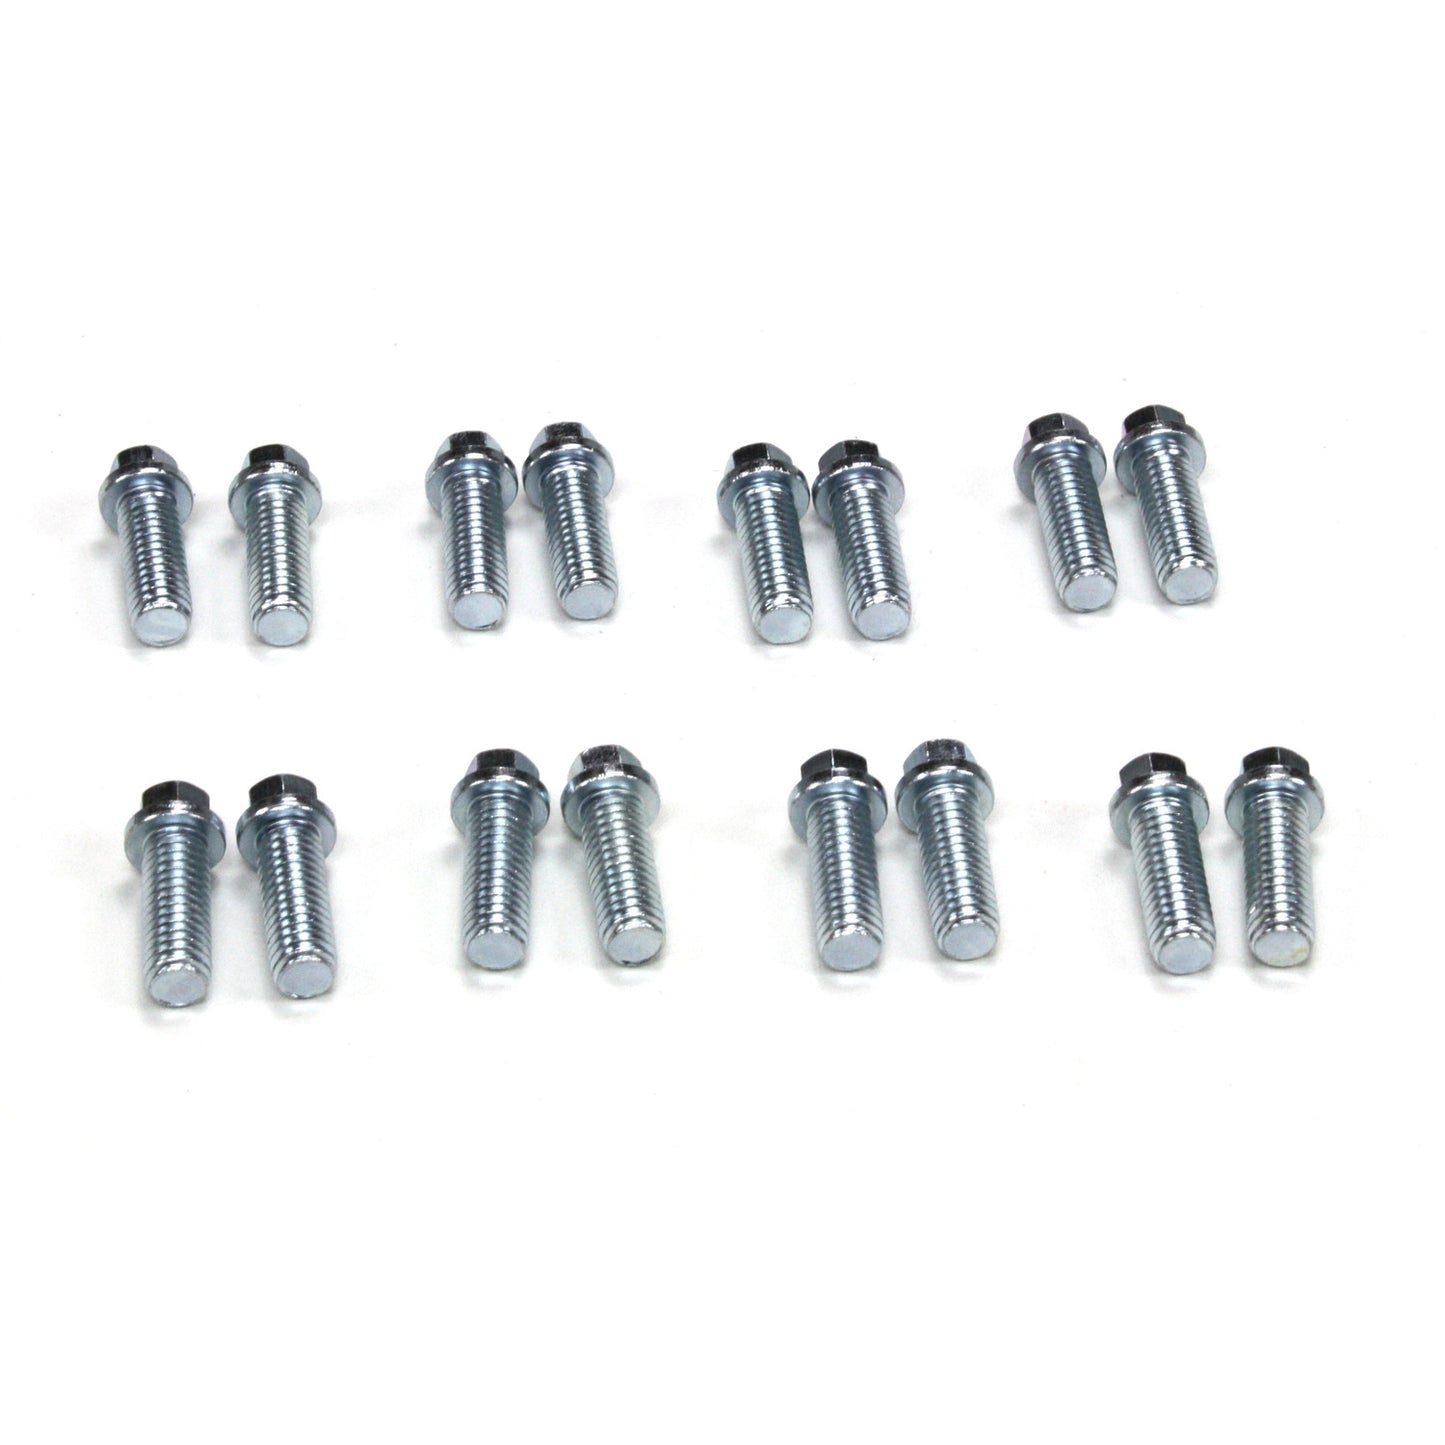 Patriot Exhaust H7974 3/8-16 x 1 Zinc plated header bolts (pack of 16)